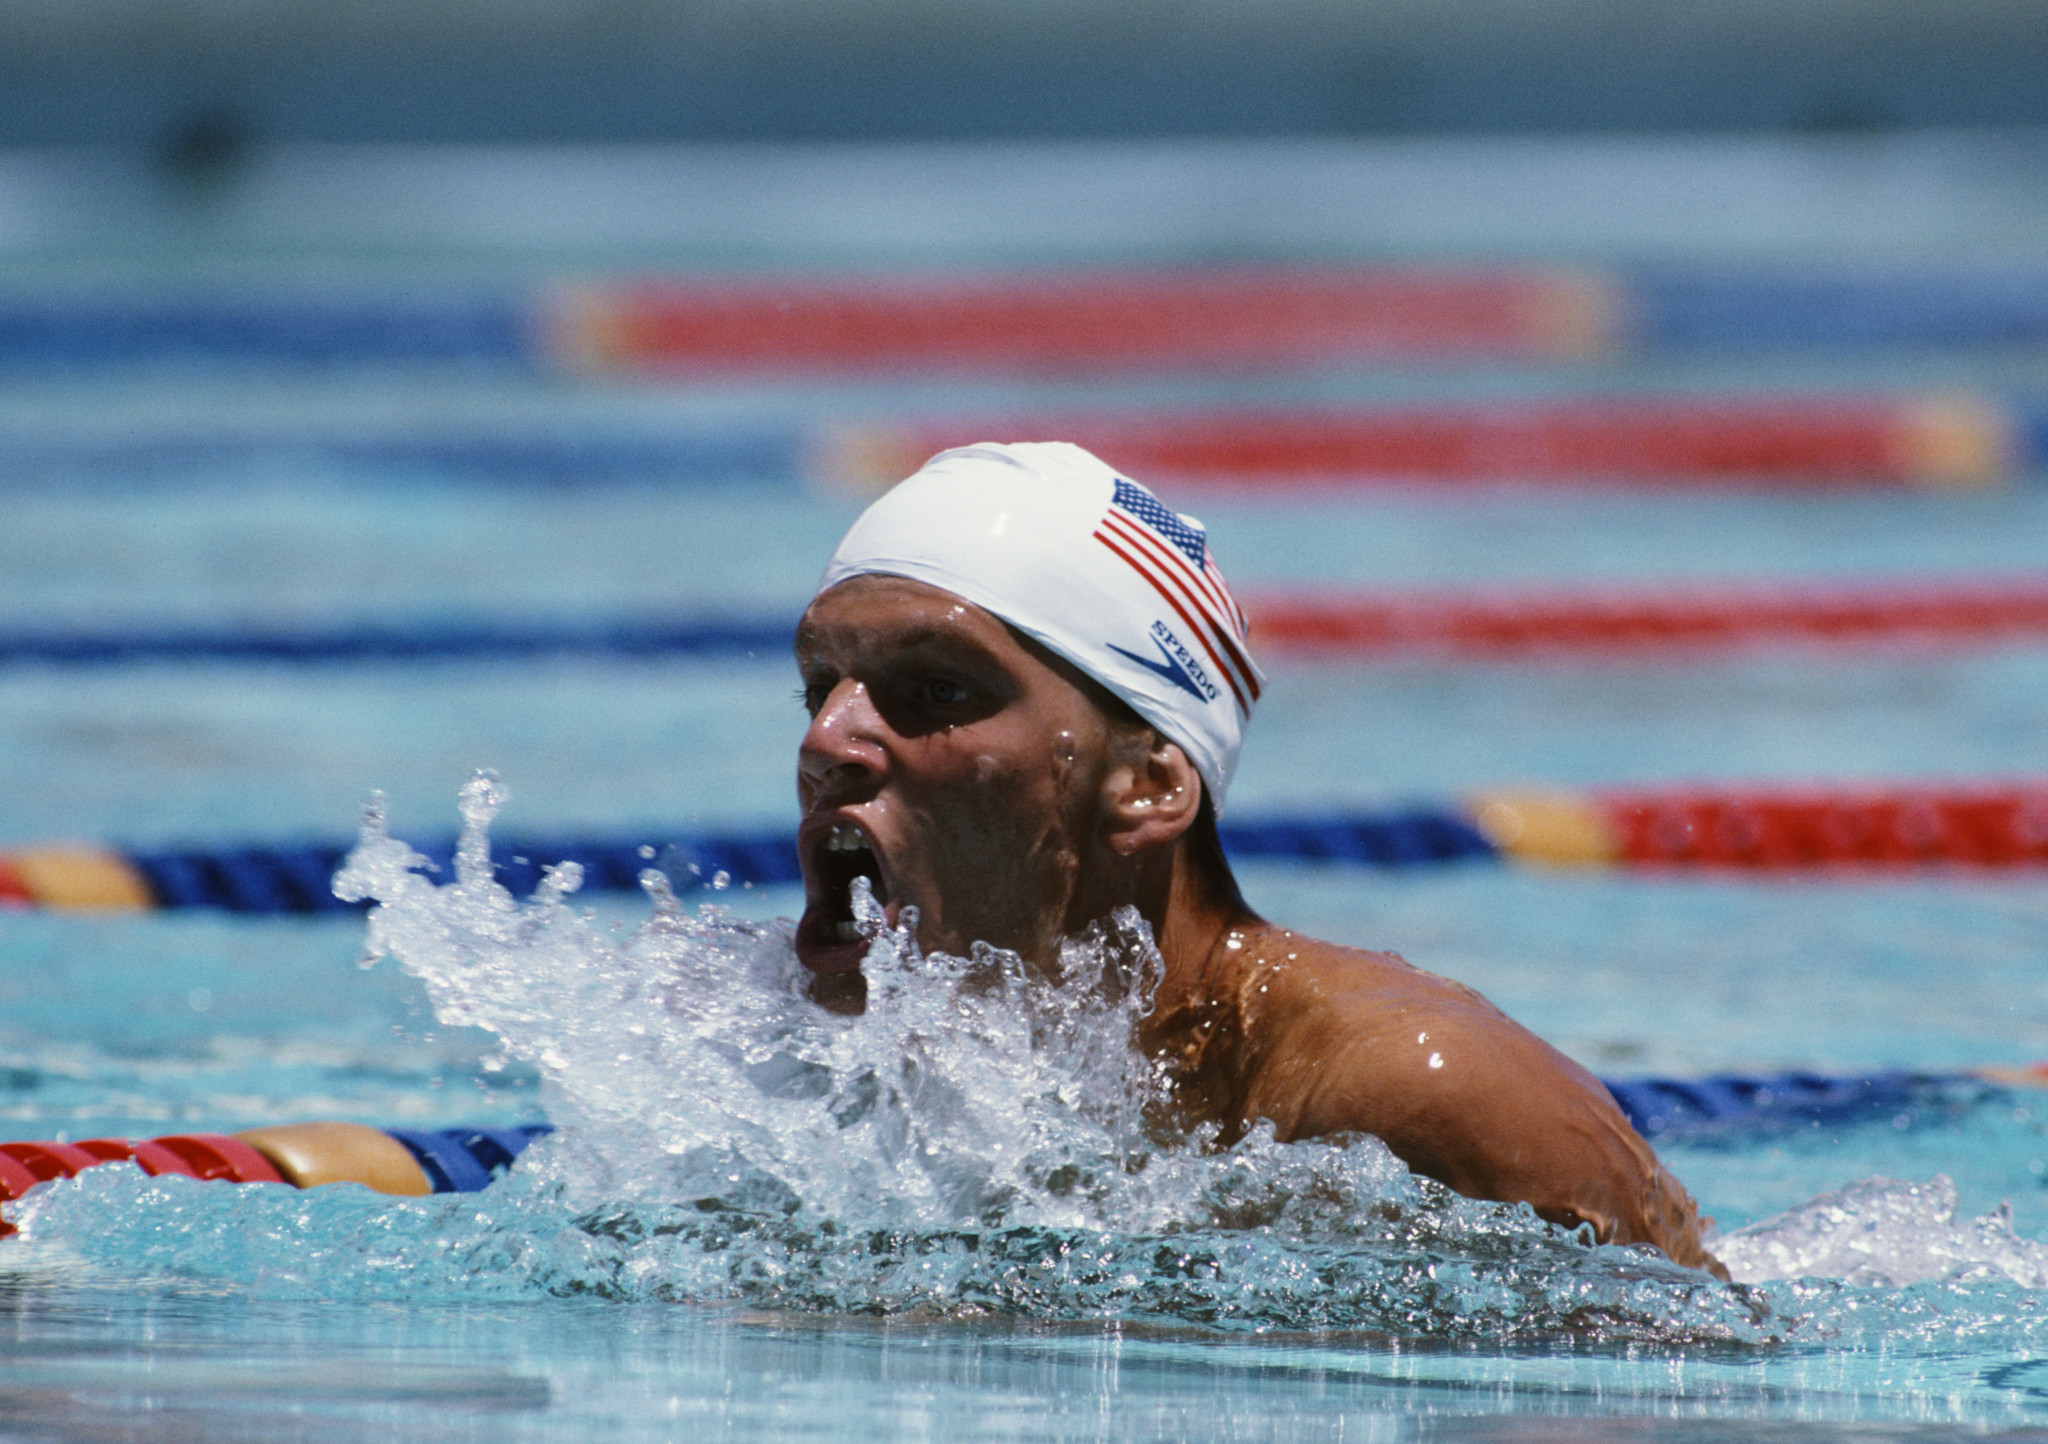 Steve Lundquist of Southern Methodist University and the United States competes in the Men's 100 metres Breaststroke race during the 10th Summer Universiade Games on 25th August 1979 in Mexico City, Mexico. © Tony Duffy/Getty Images